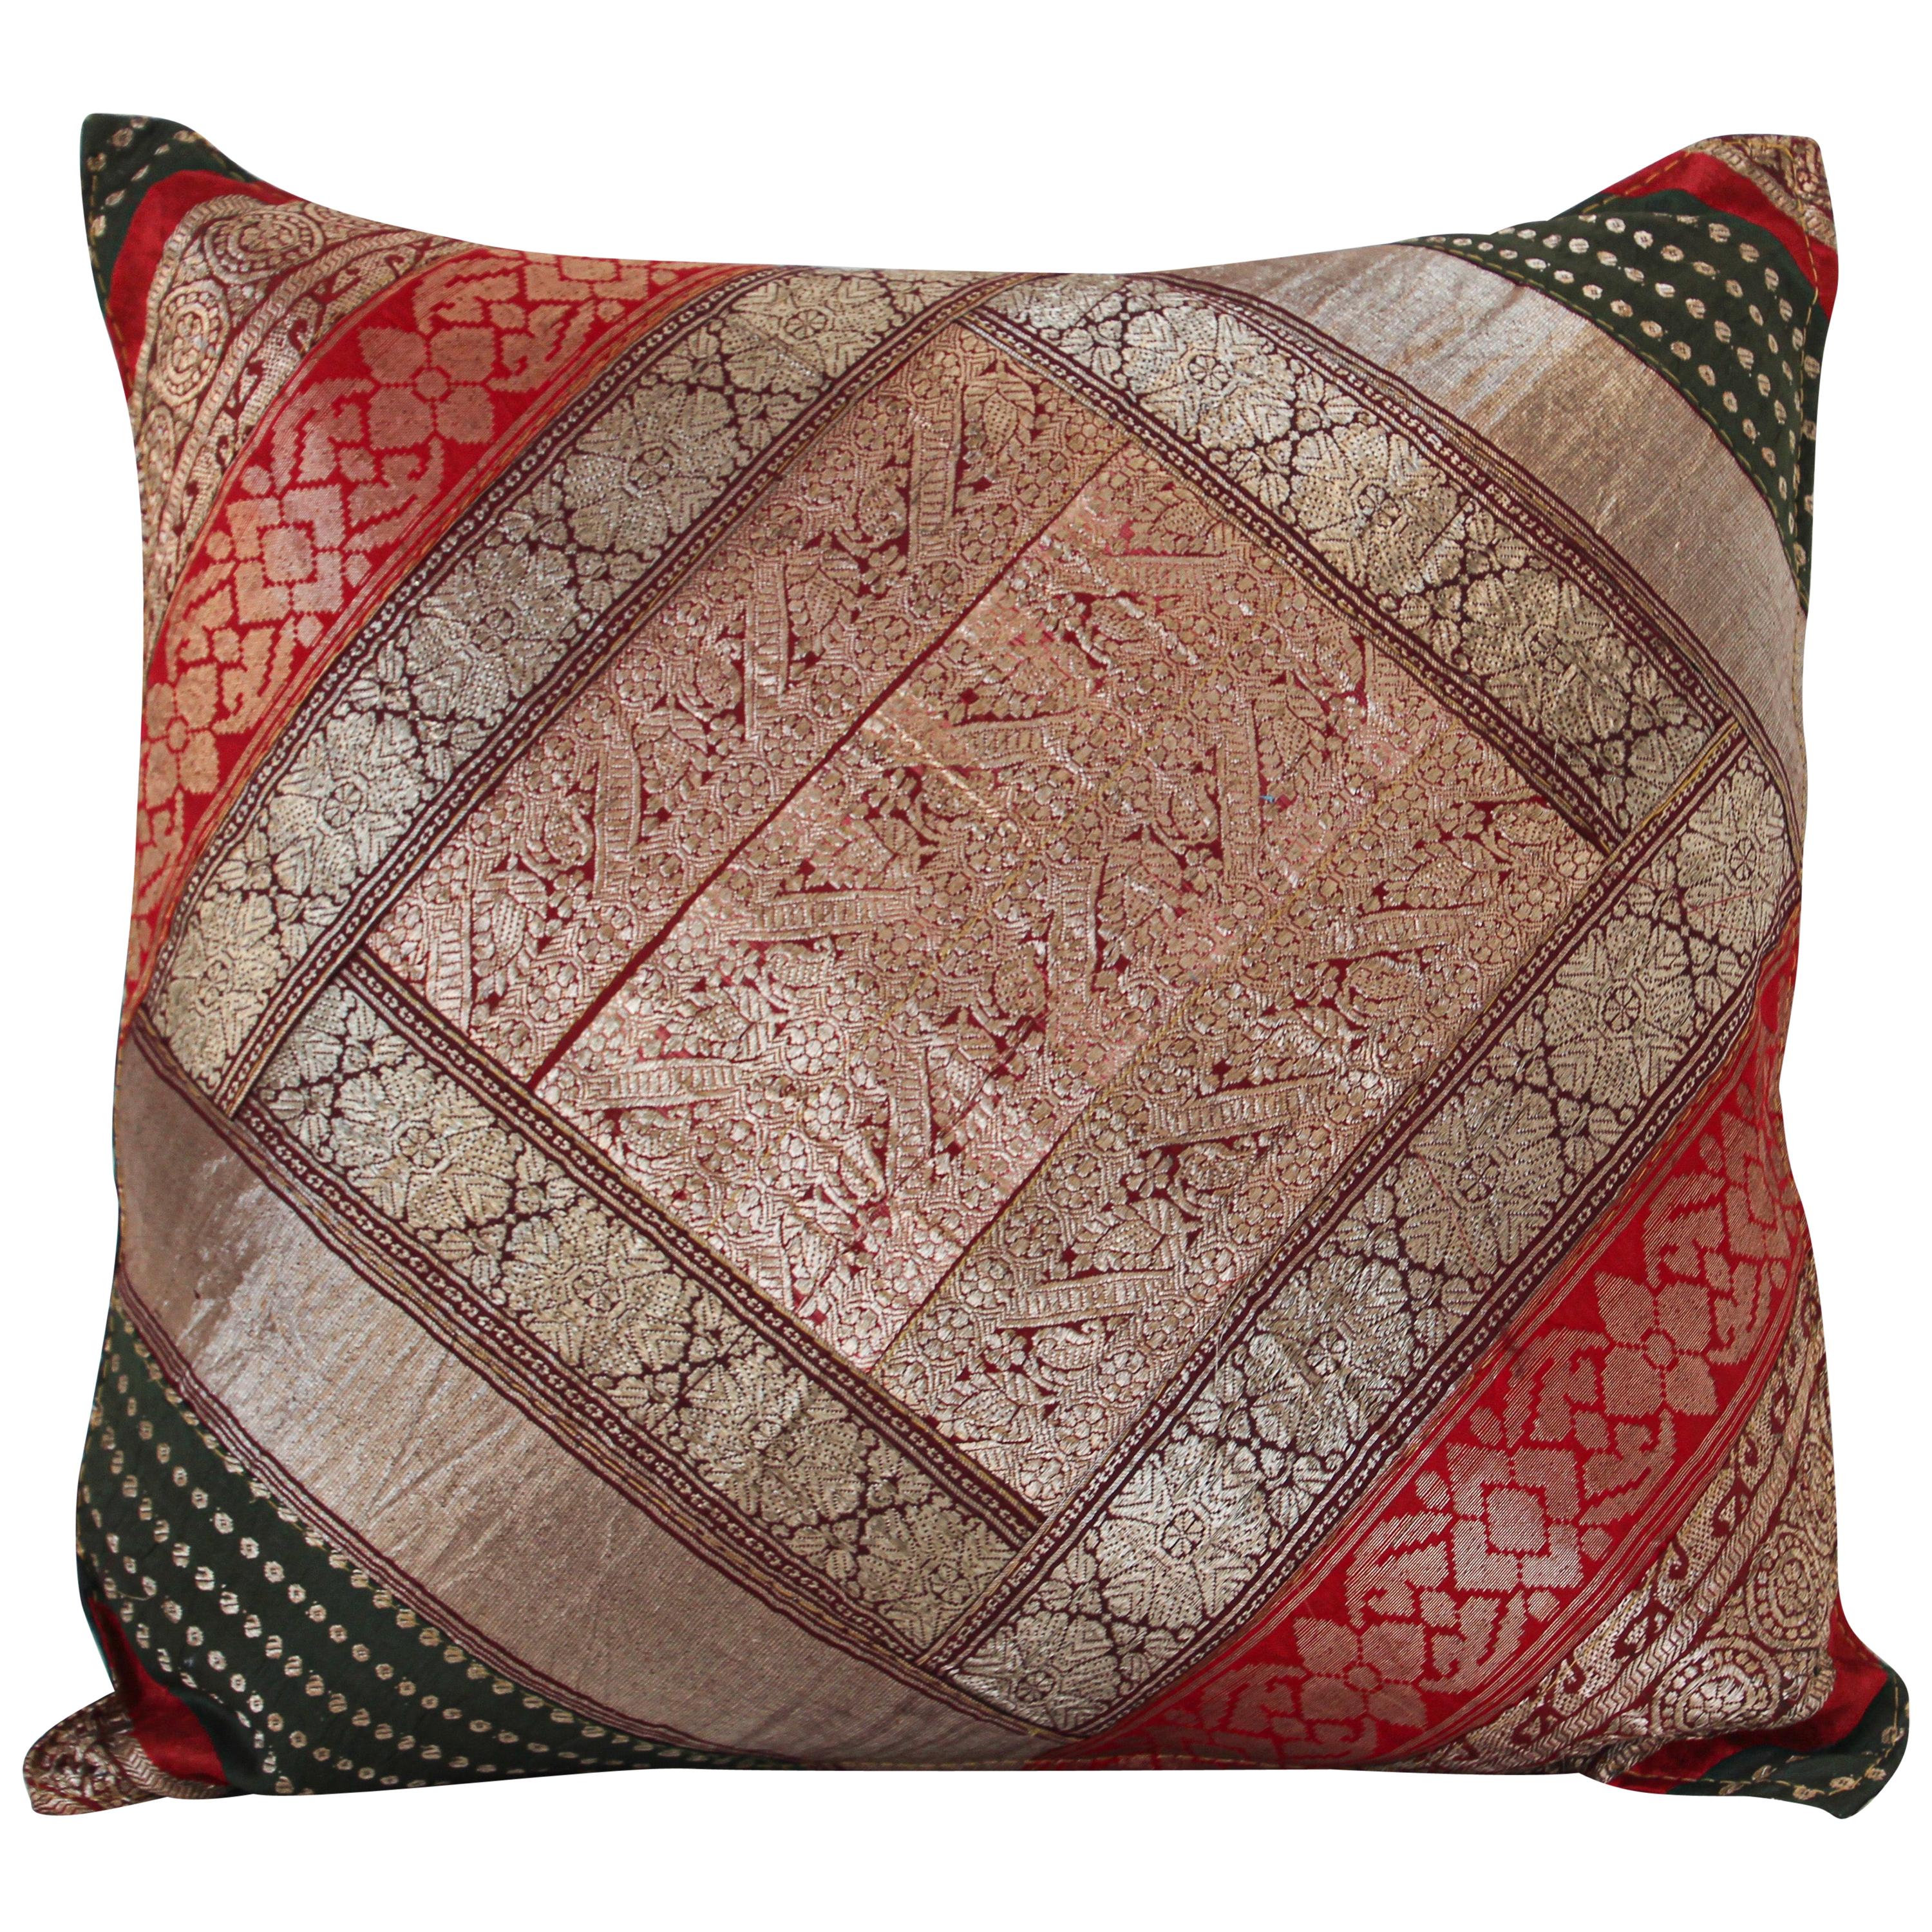 Details about  / 16/" DUPIONI SILK EMBROIDERED PAISLEY PILLOW CUSHION COVER Throw Indian Decor